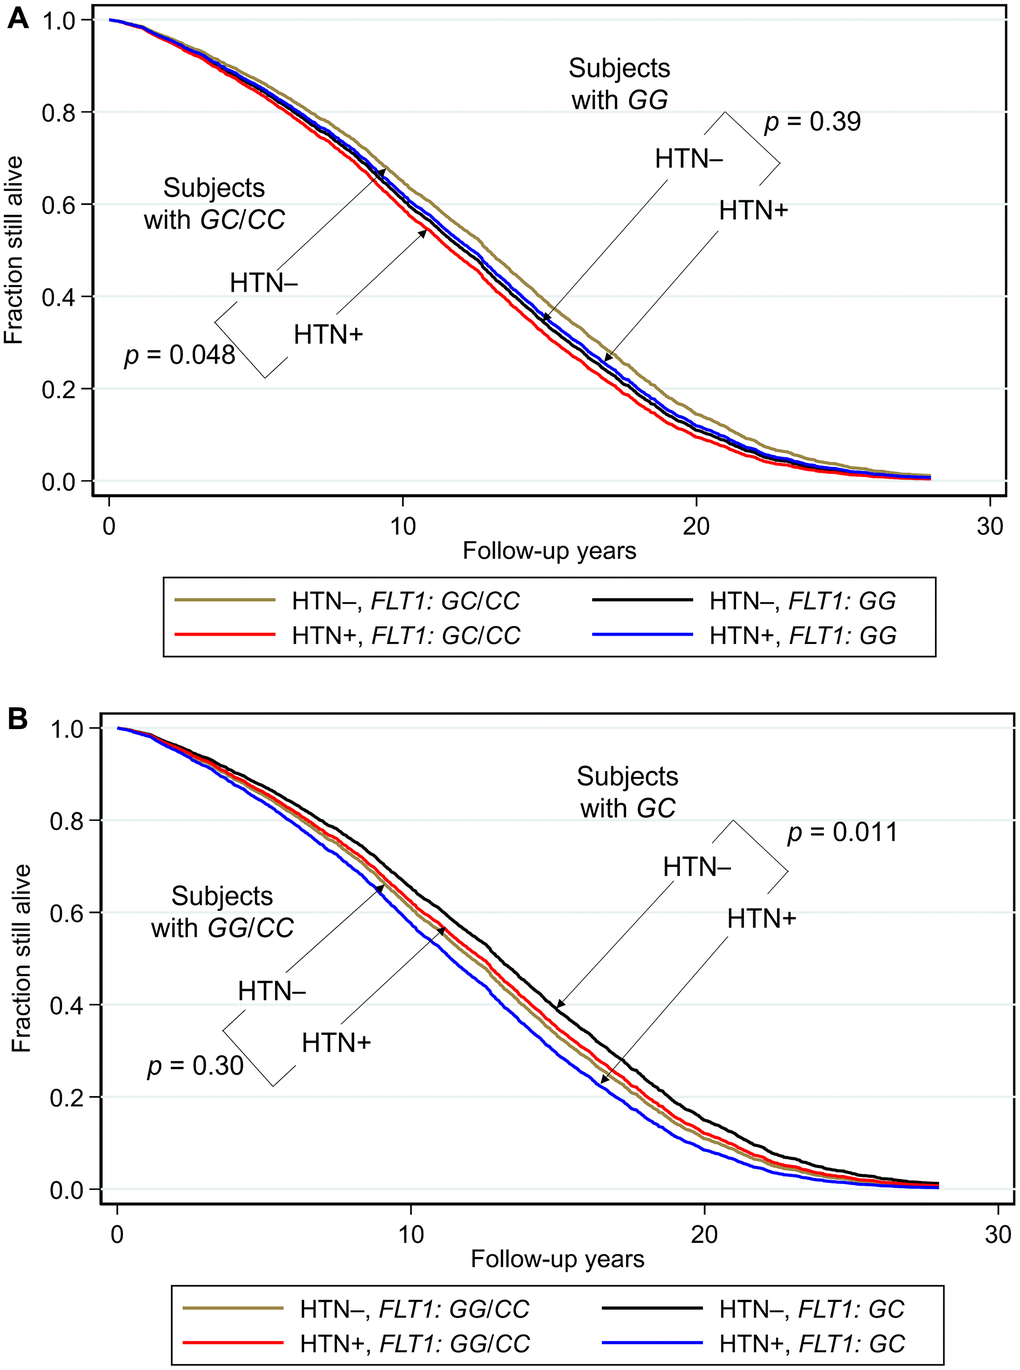 Survival curves spanning the period from baseline (1991–1993) to December 31, 2019 showing fraction still alive for subjects with and without hypertension according to genotypes of FLT1 SNP rs3794396. (A) Major allele recessive model, and (B) heterozygote disadvantage model, the survival probabilities were estimated from Cox proportional hazard models. In (A) Cox model was h(t) = h(t0) * exp(β1*Age + β2*BMI + β3*glucose + β4*hypertension + β5*FLT1